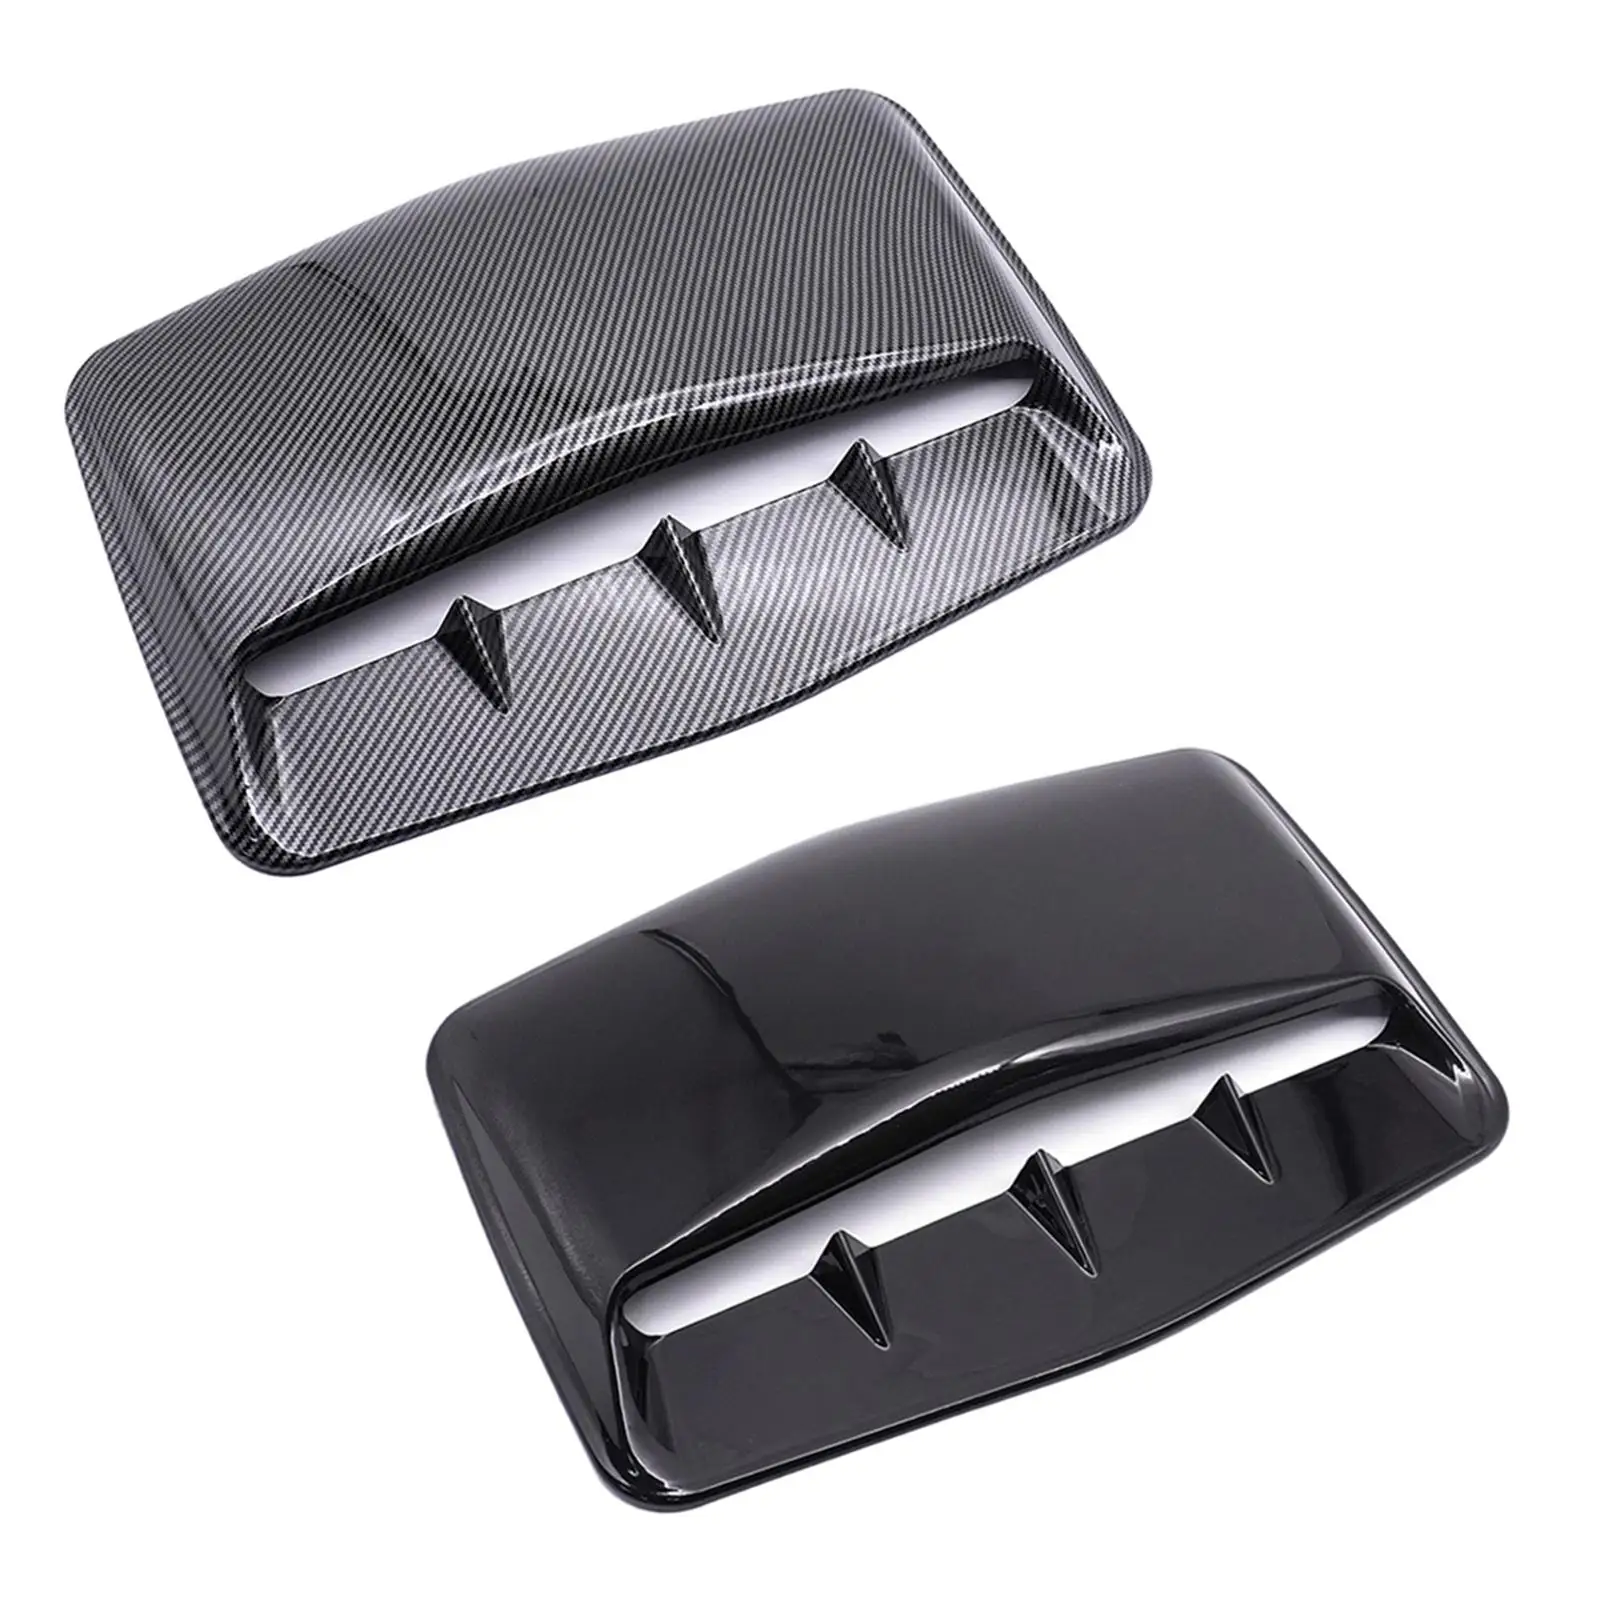 Universal Car Hood Vent Air Vent Cover Air Flow Intake Cover Fit for Car